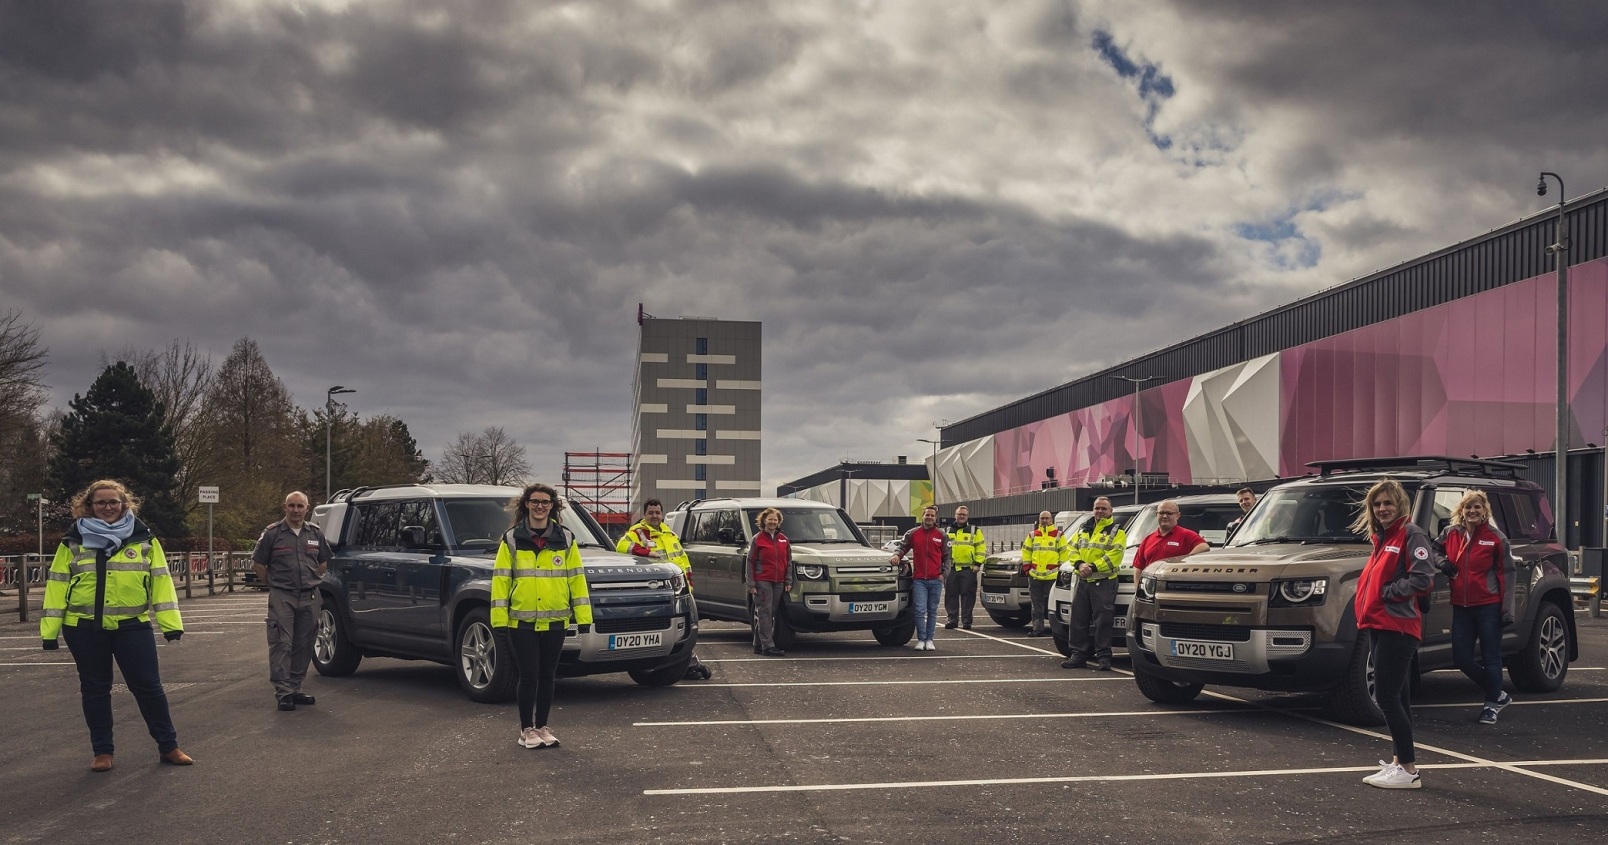 Jaguar and Land Rover Deploy Global Fleet of Vehicles to Aid COVID-19 Crisis